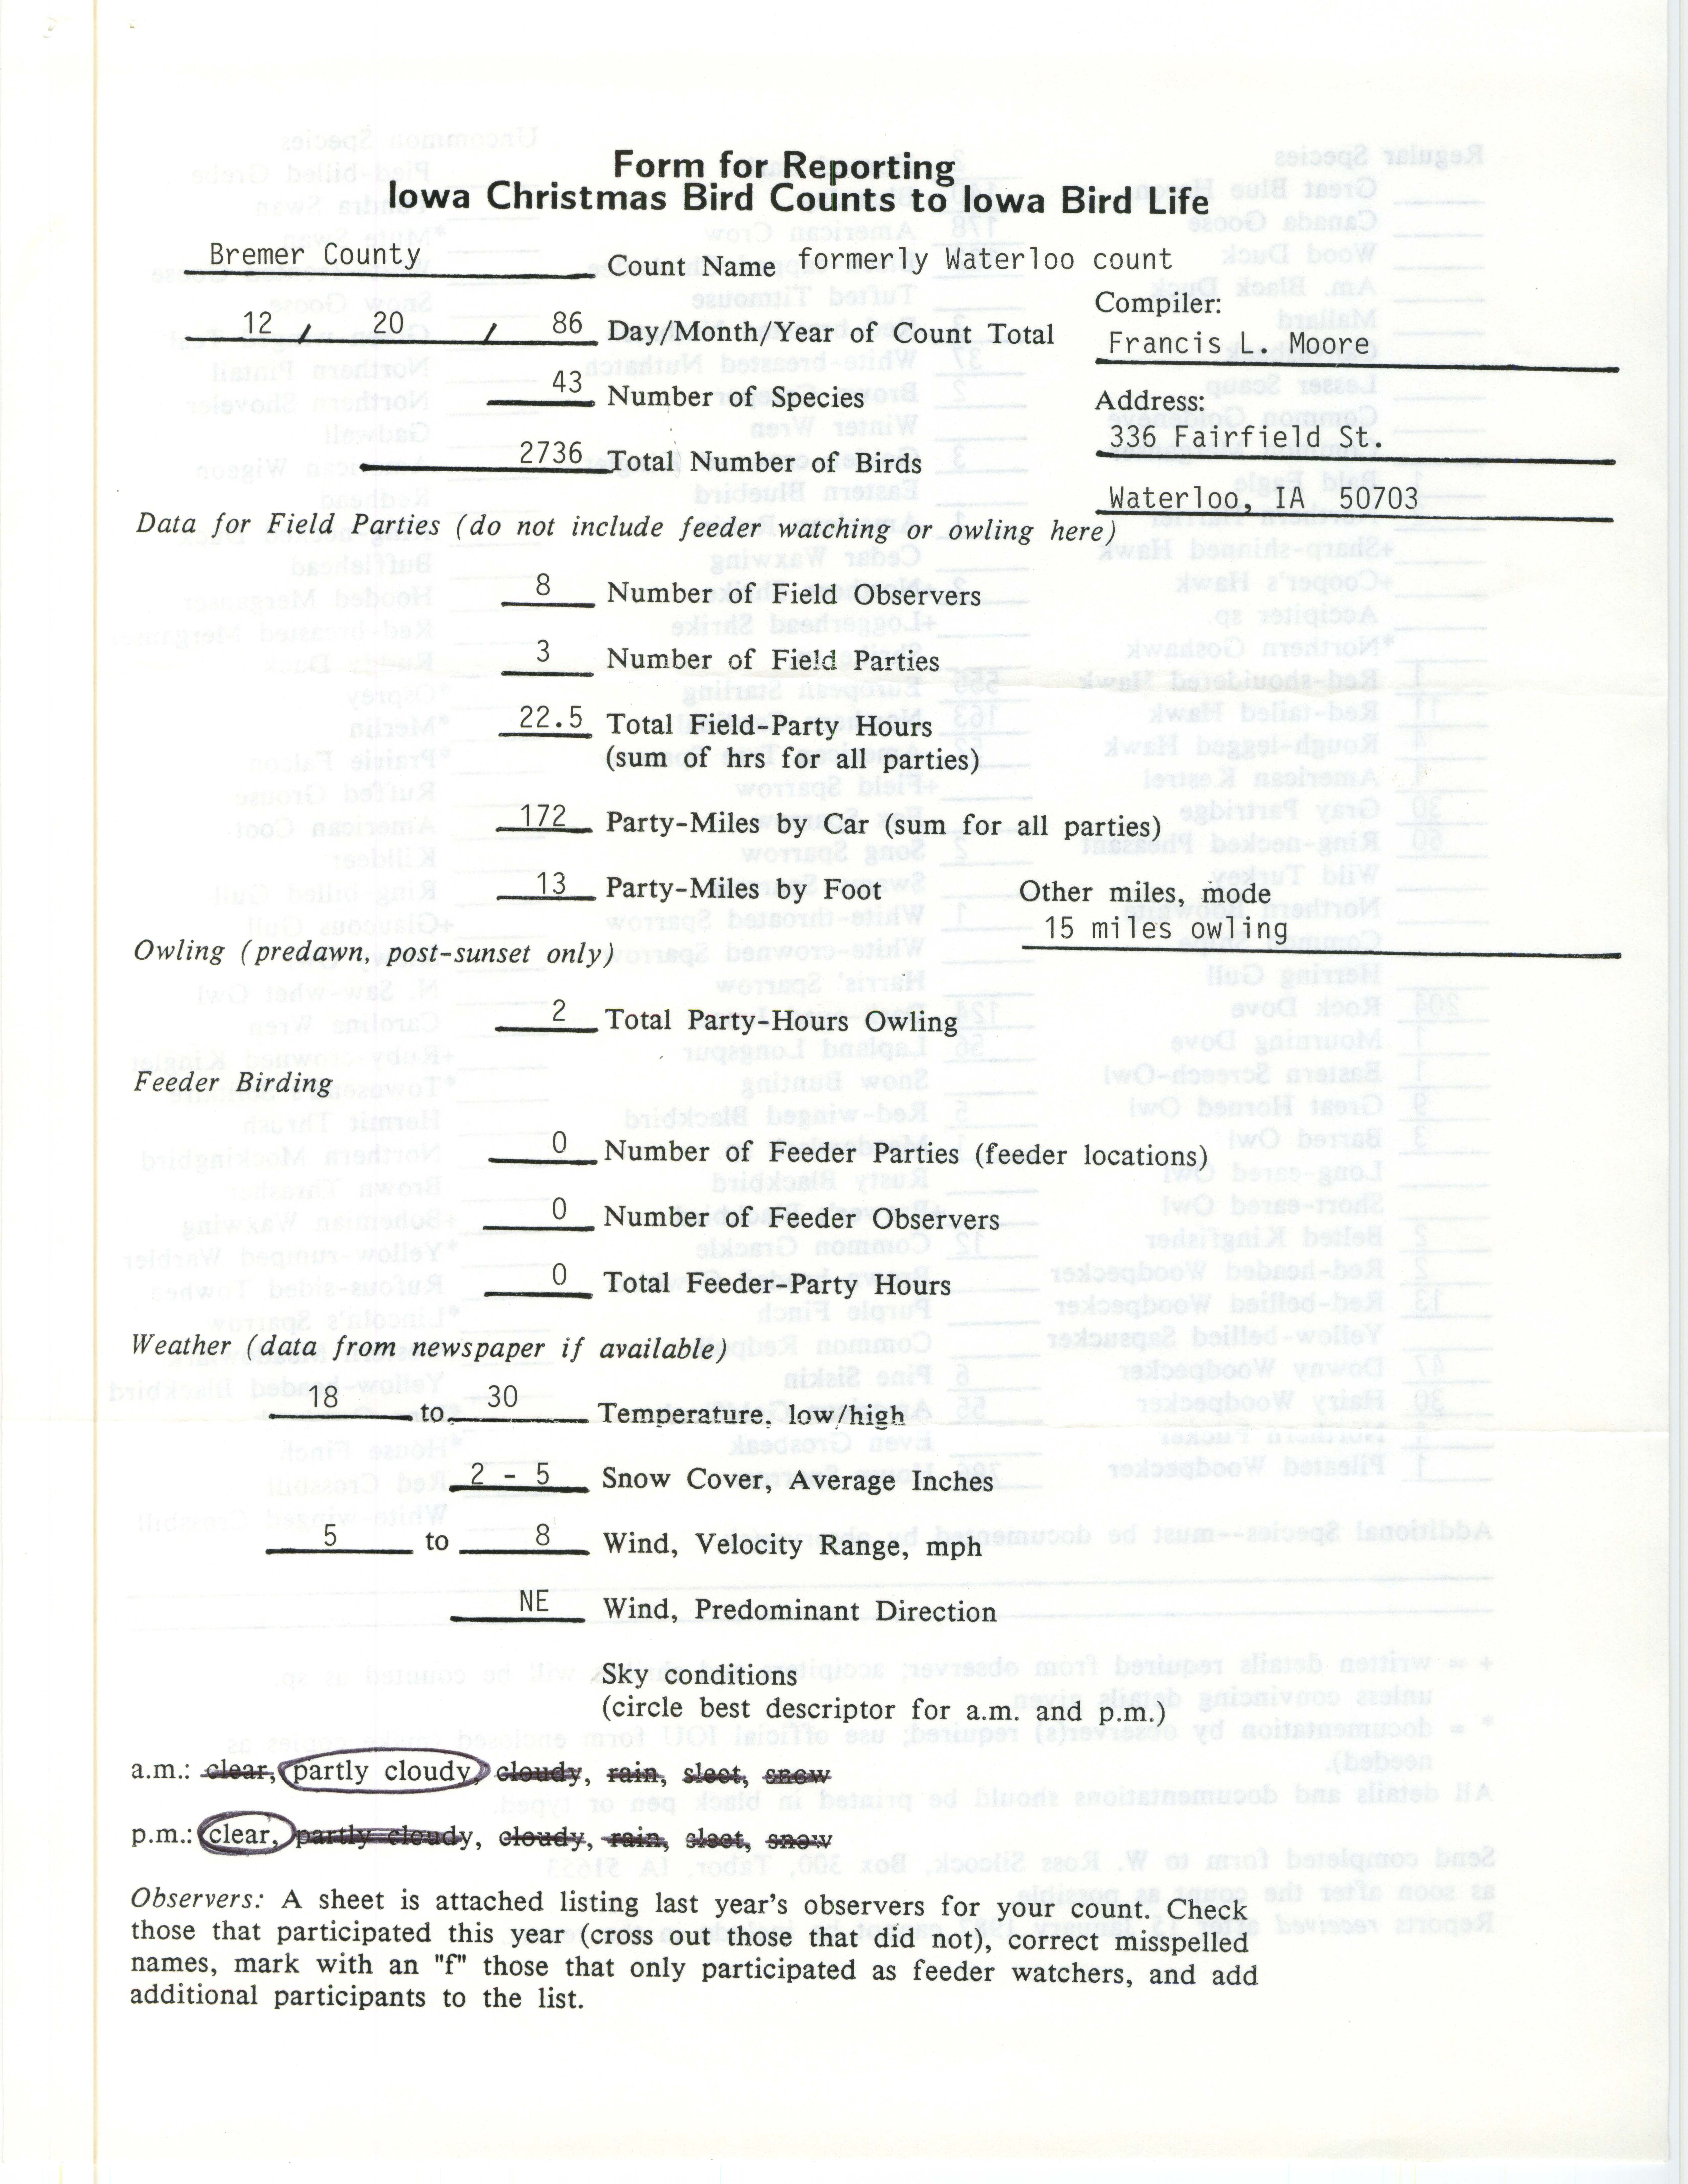 Form for reporting Iowa Christmas bird counts to Iowa Bird Life, Francis L. Moore, December 20, 1986